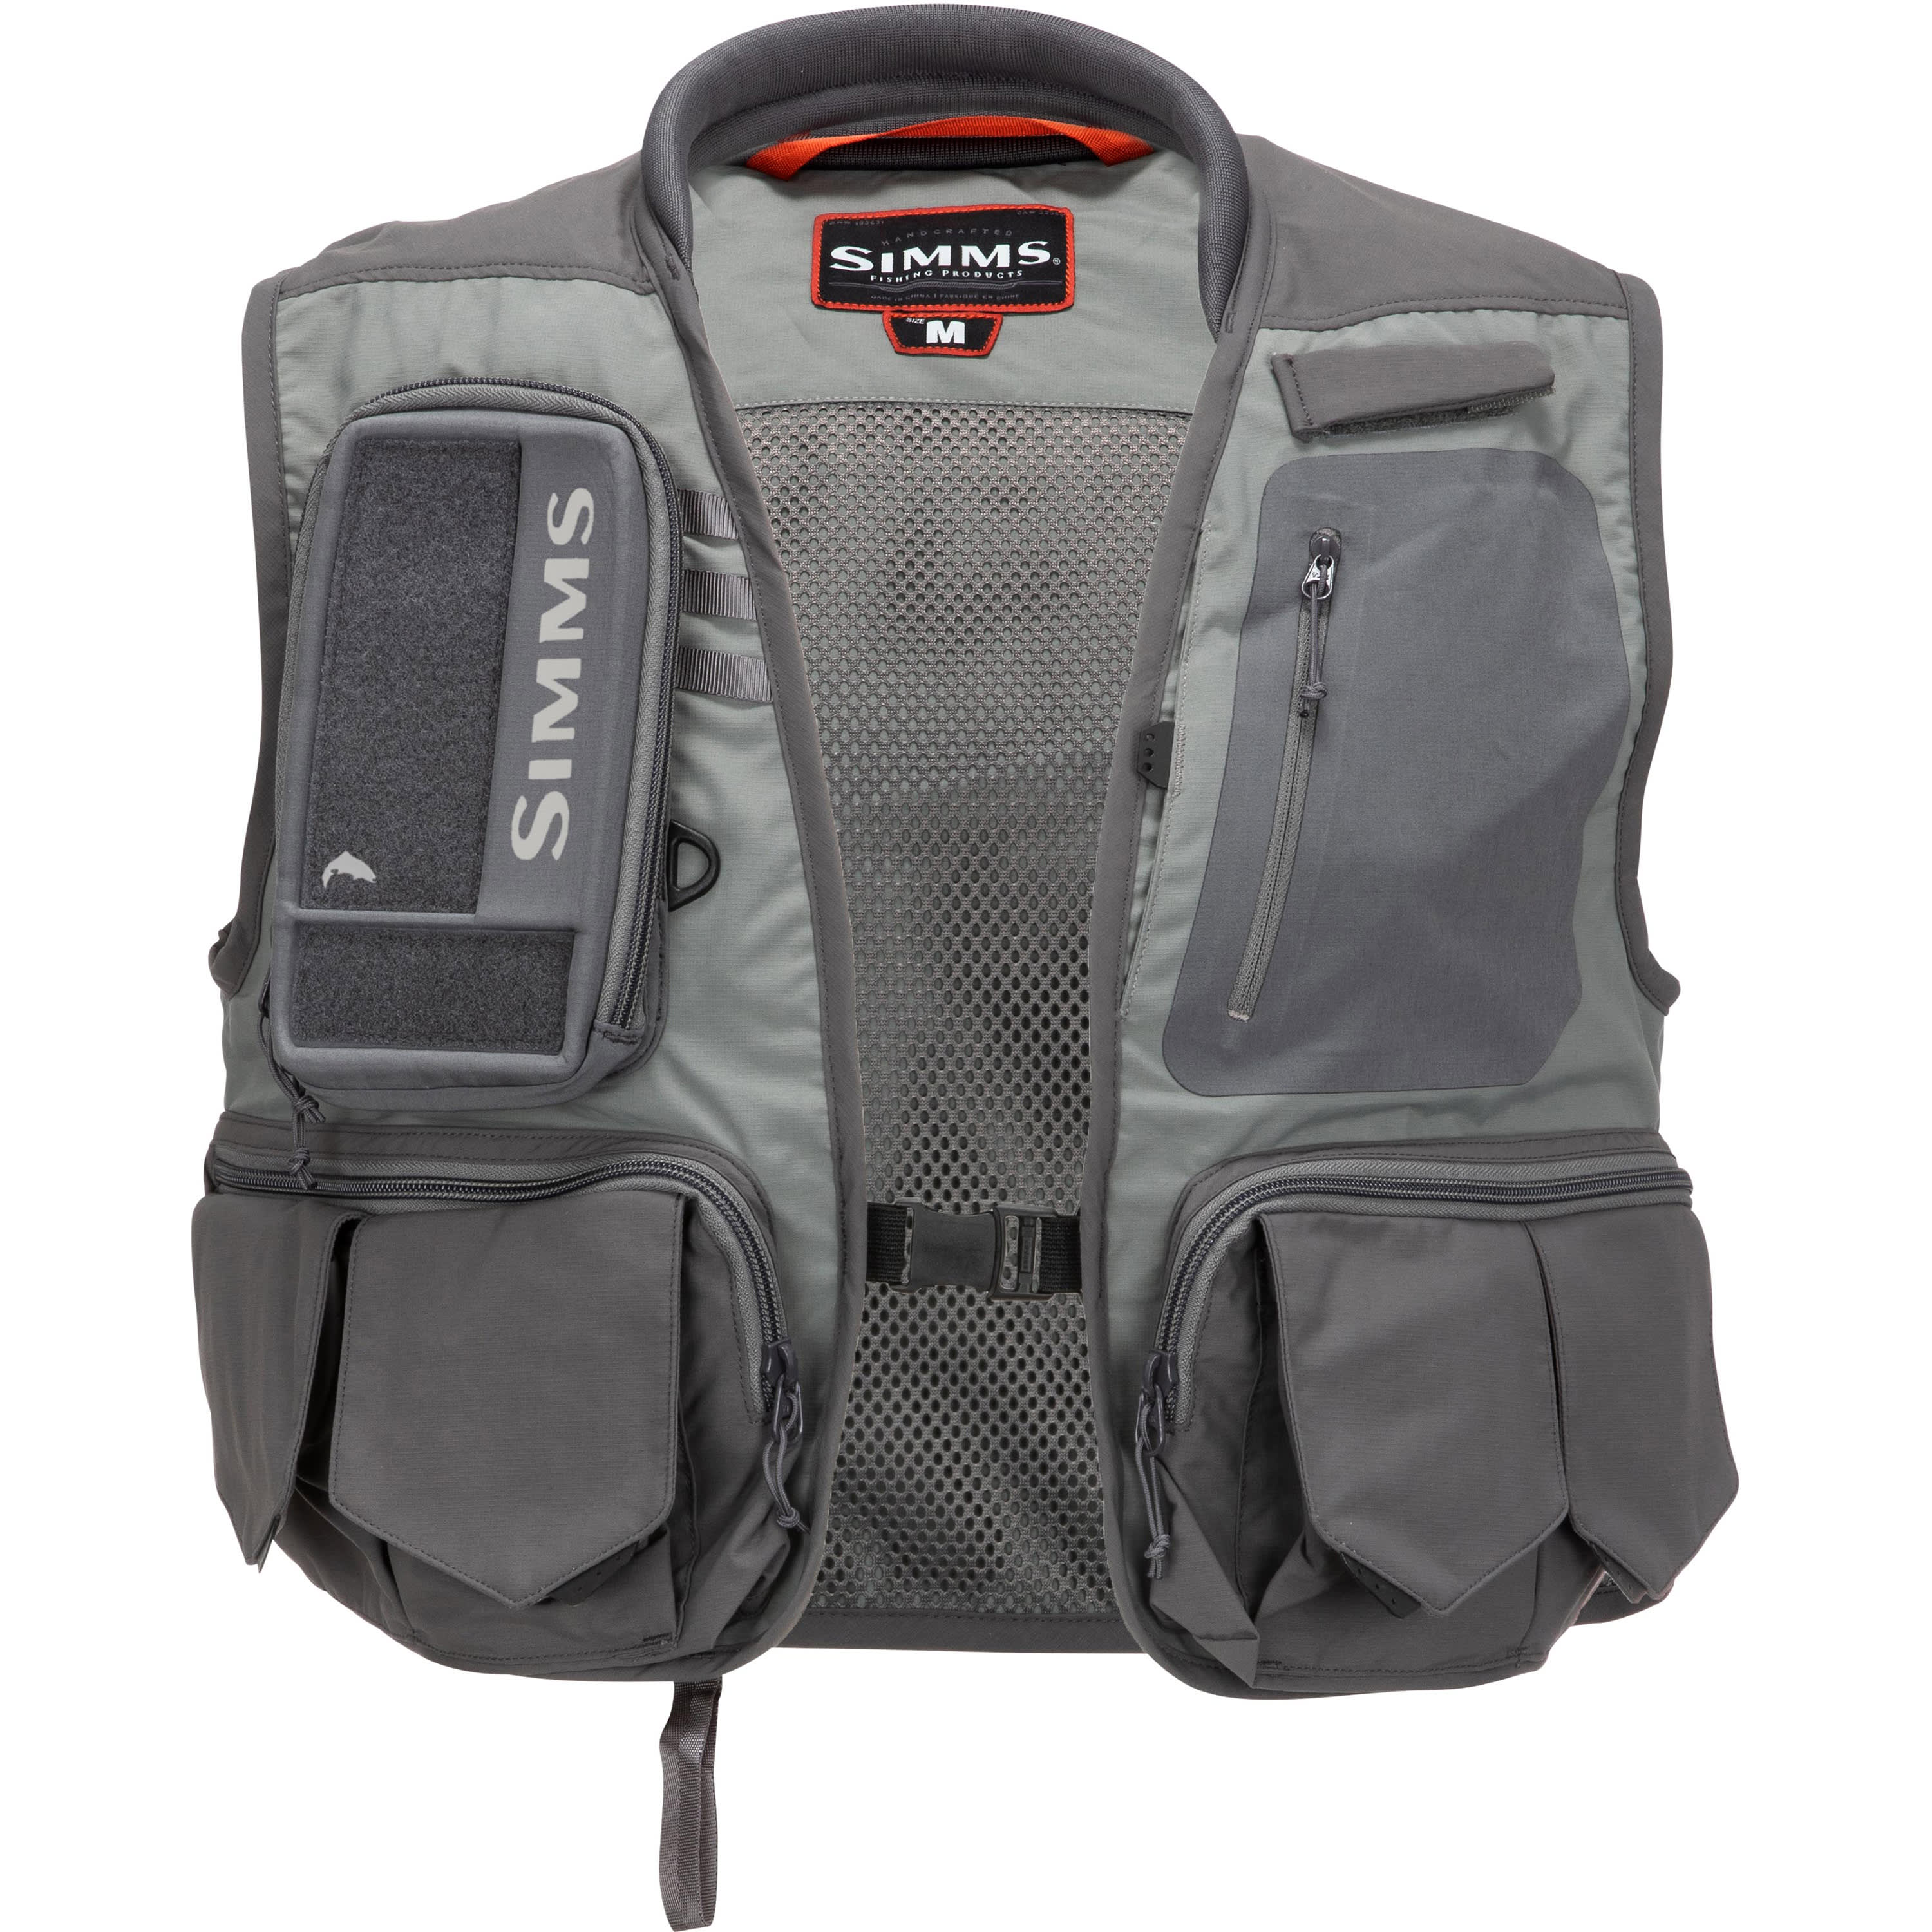 WHITE RIVER FLY Fishing Vest Large $16.99 - PicClick